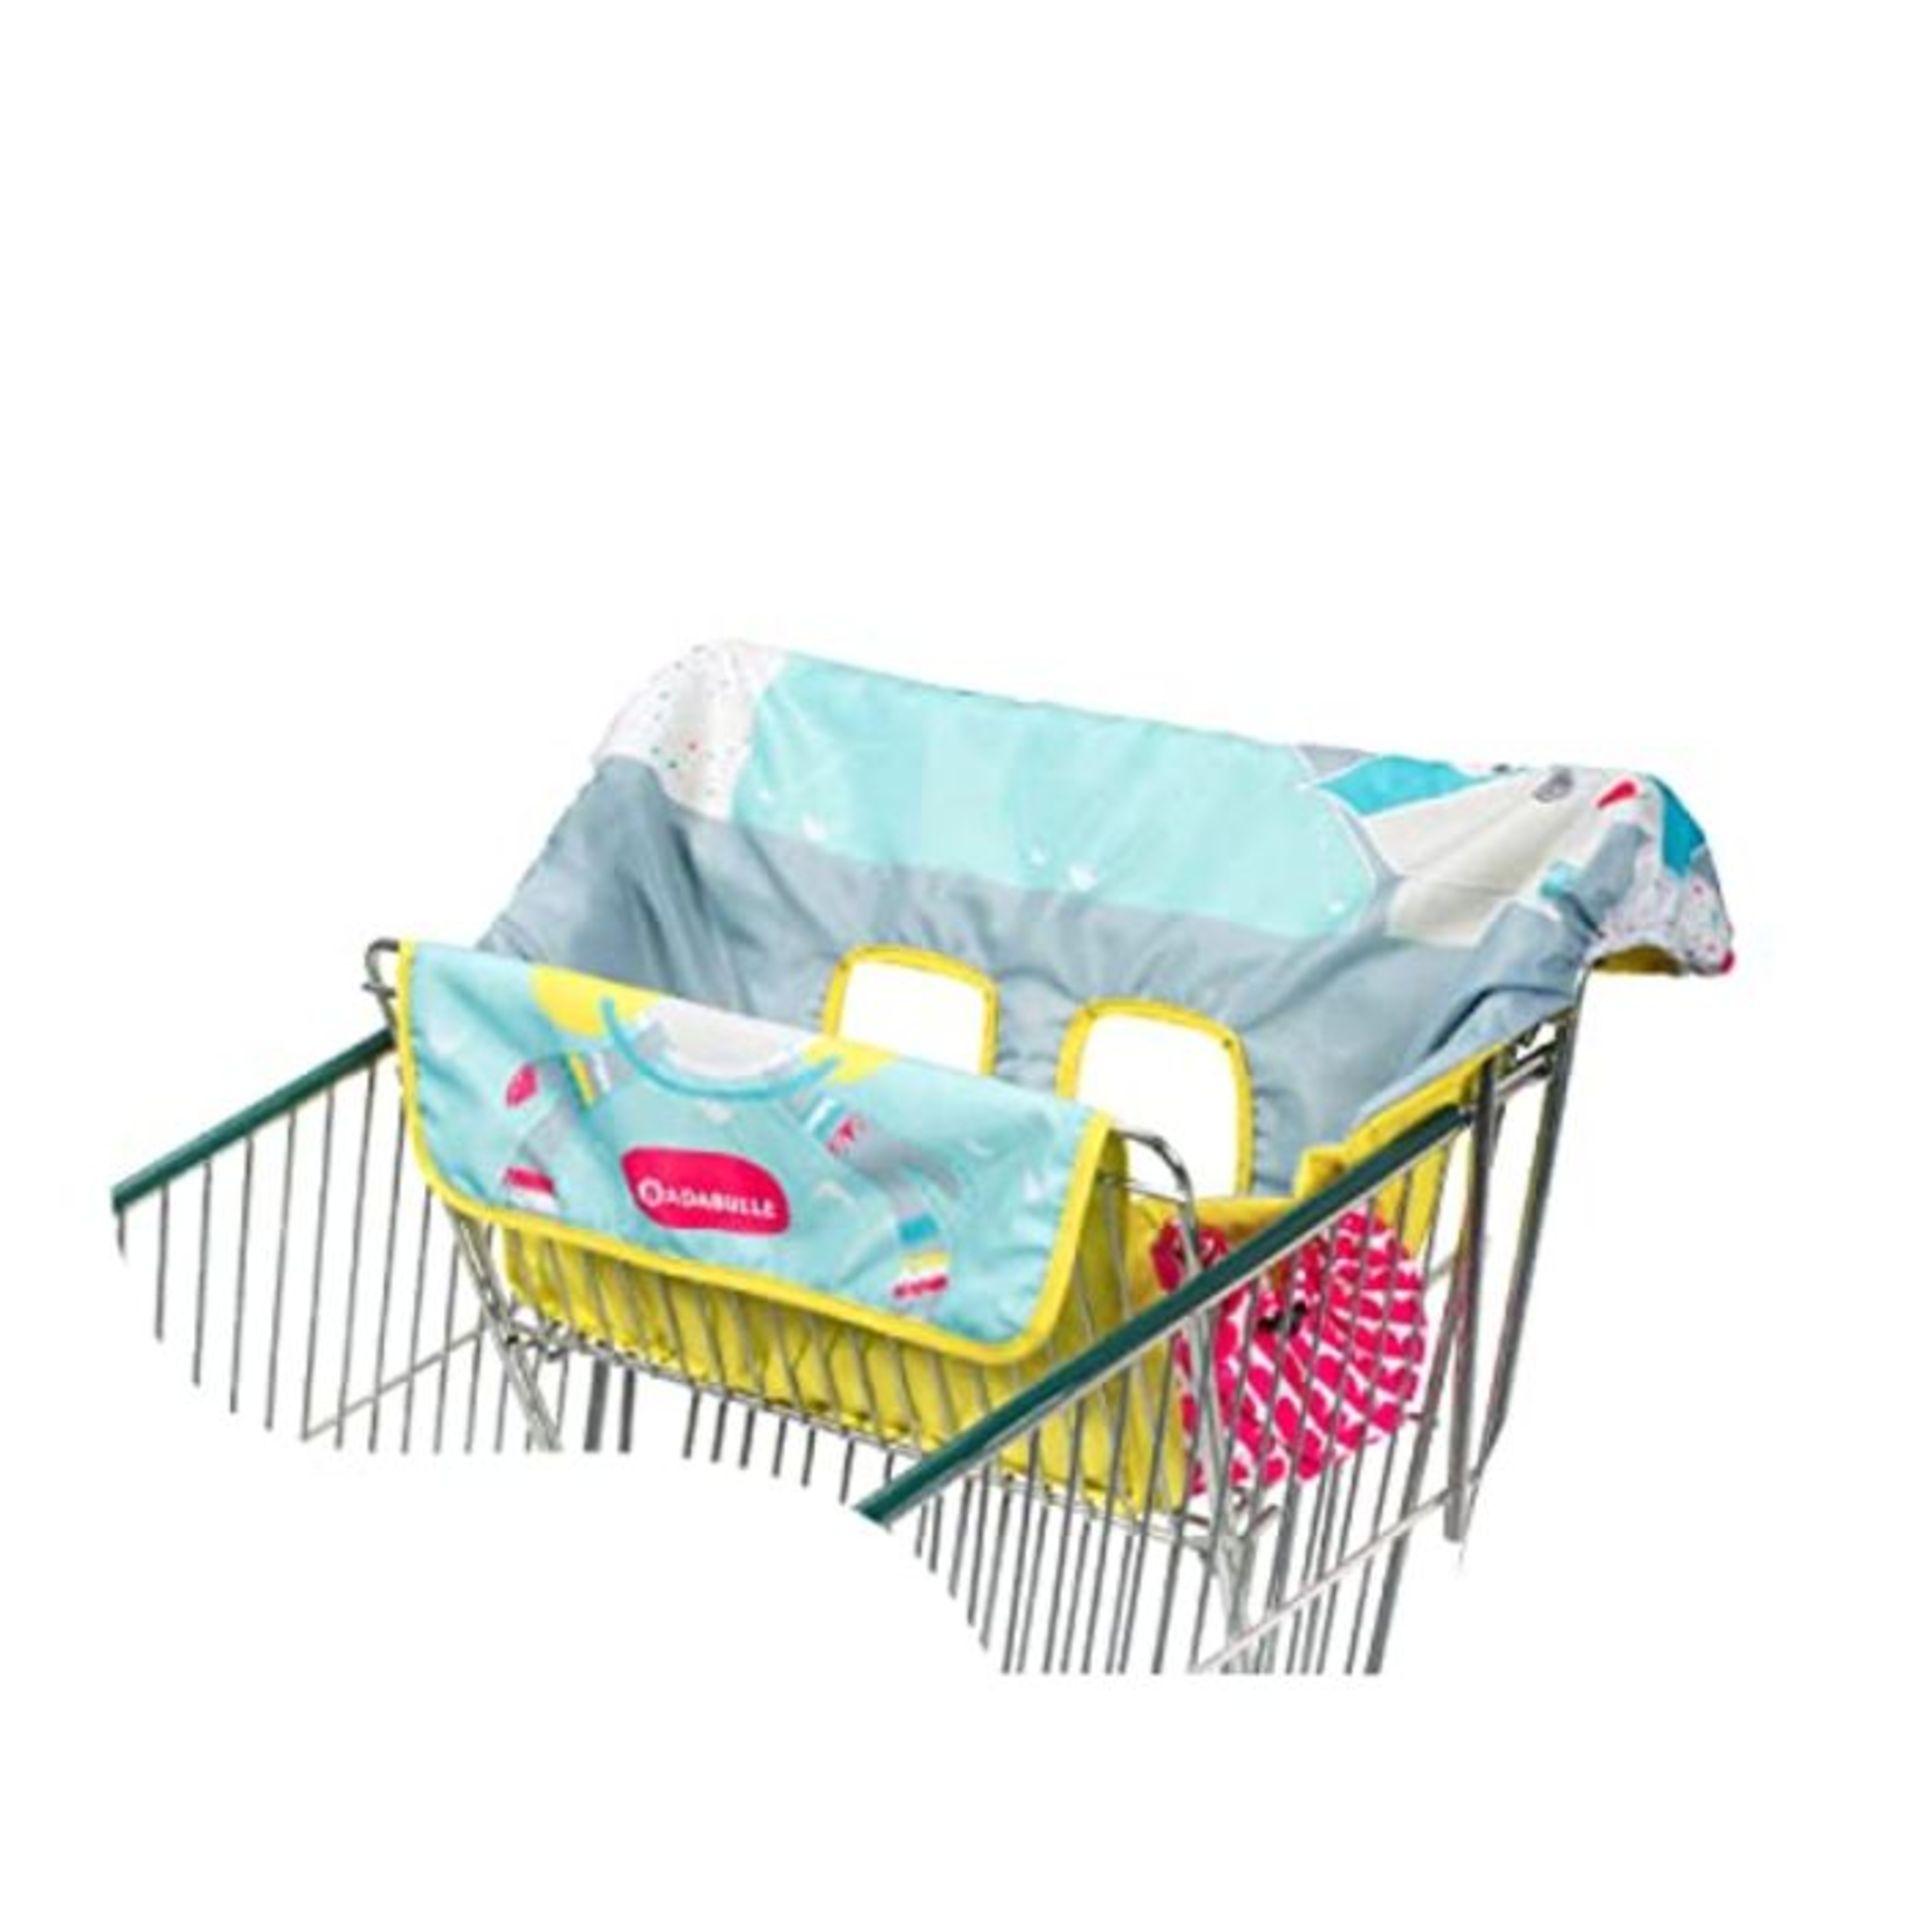 Badabulle Shopping Trolley Cover, baby trolley seat cover